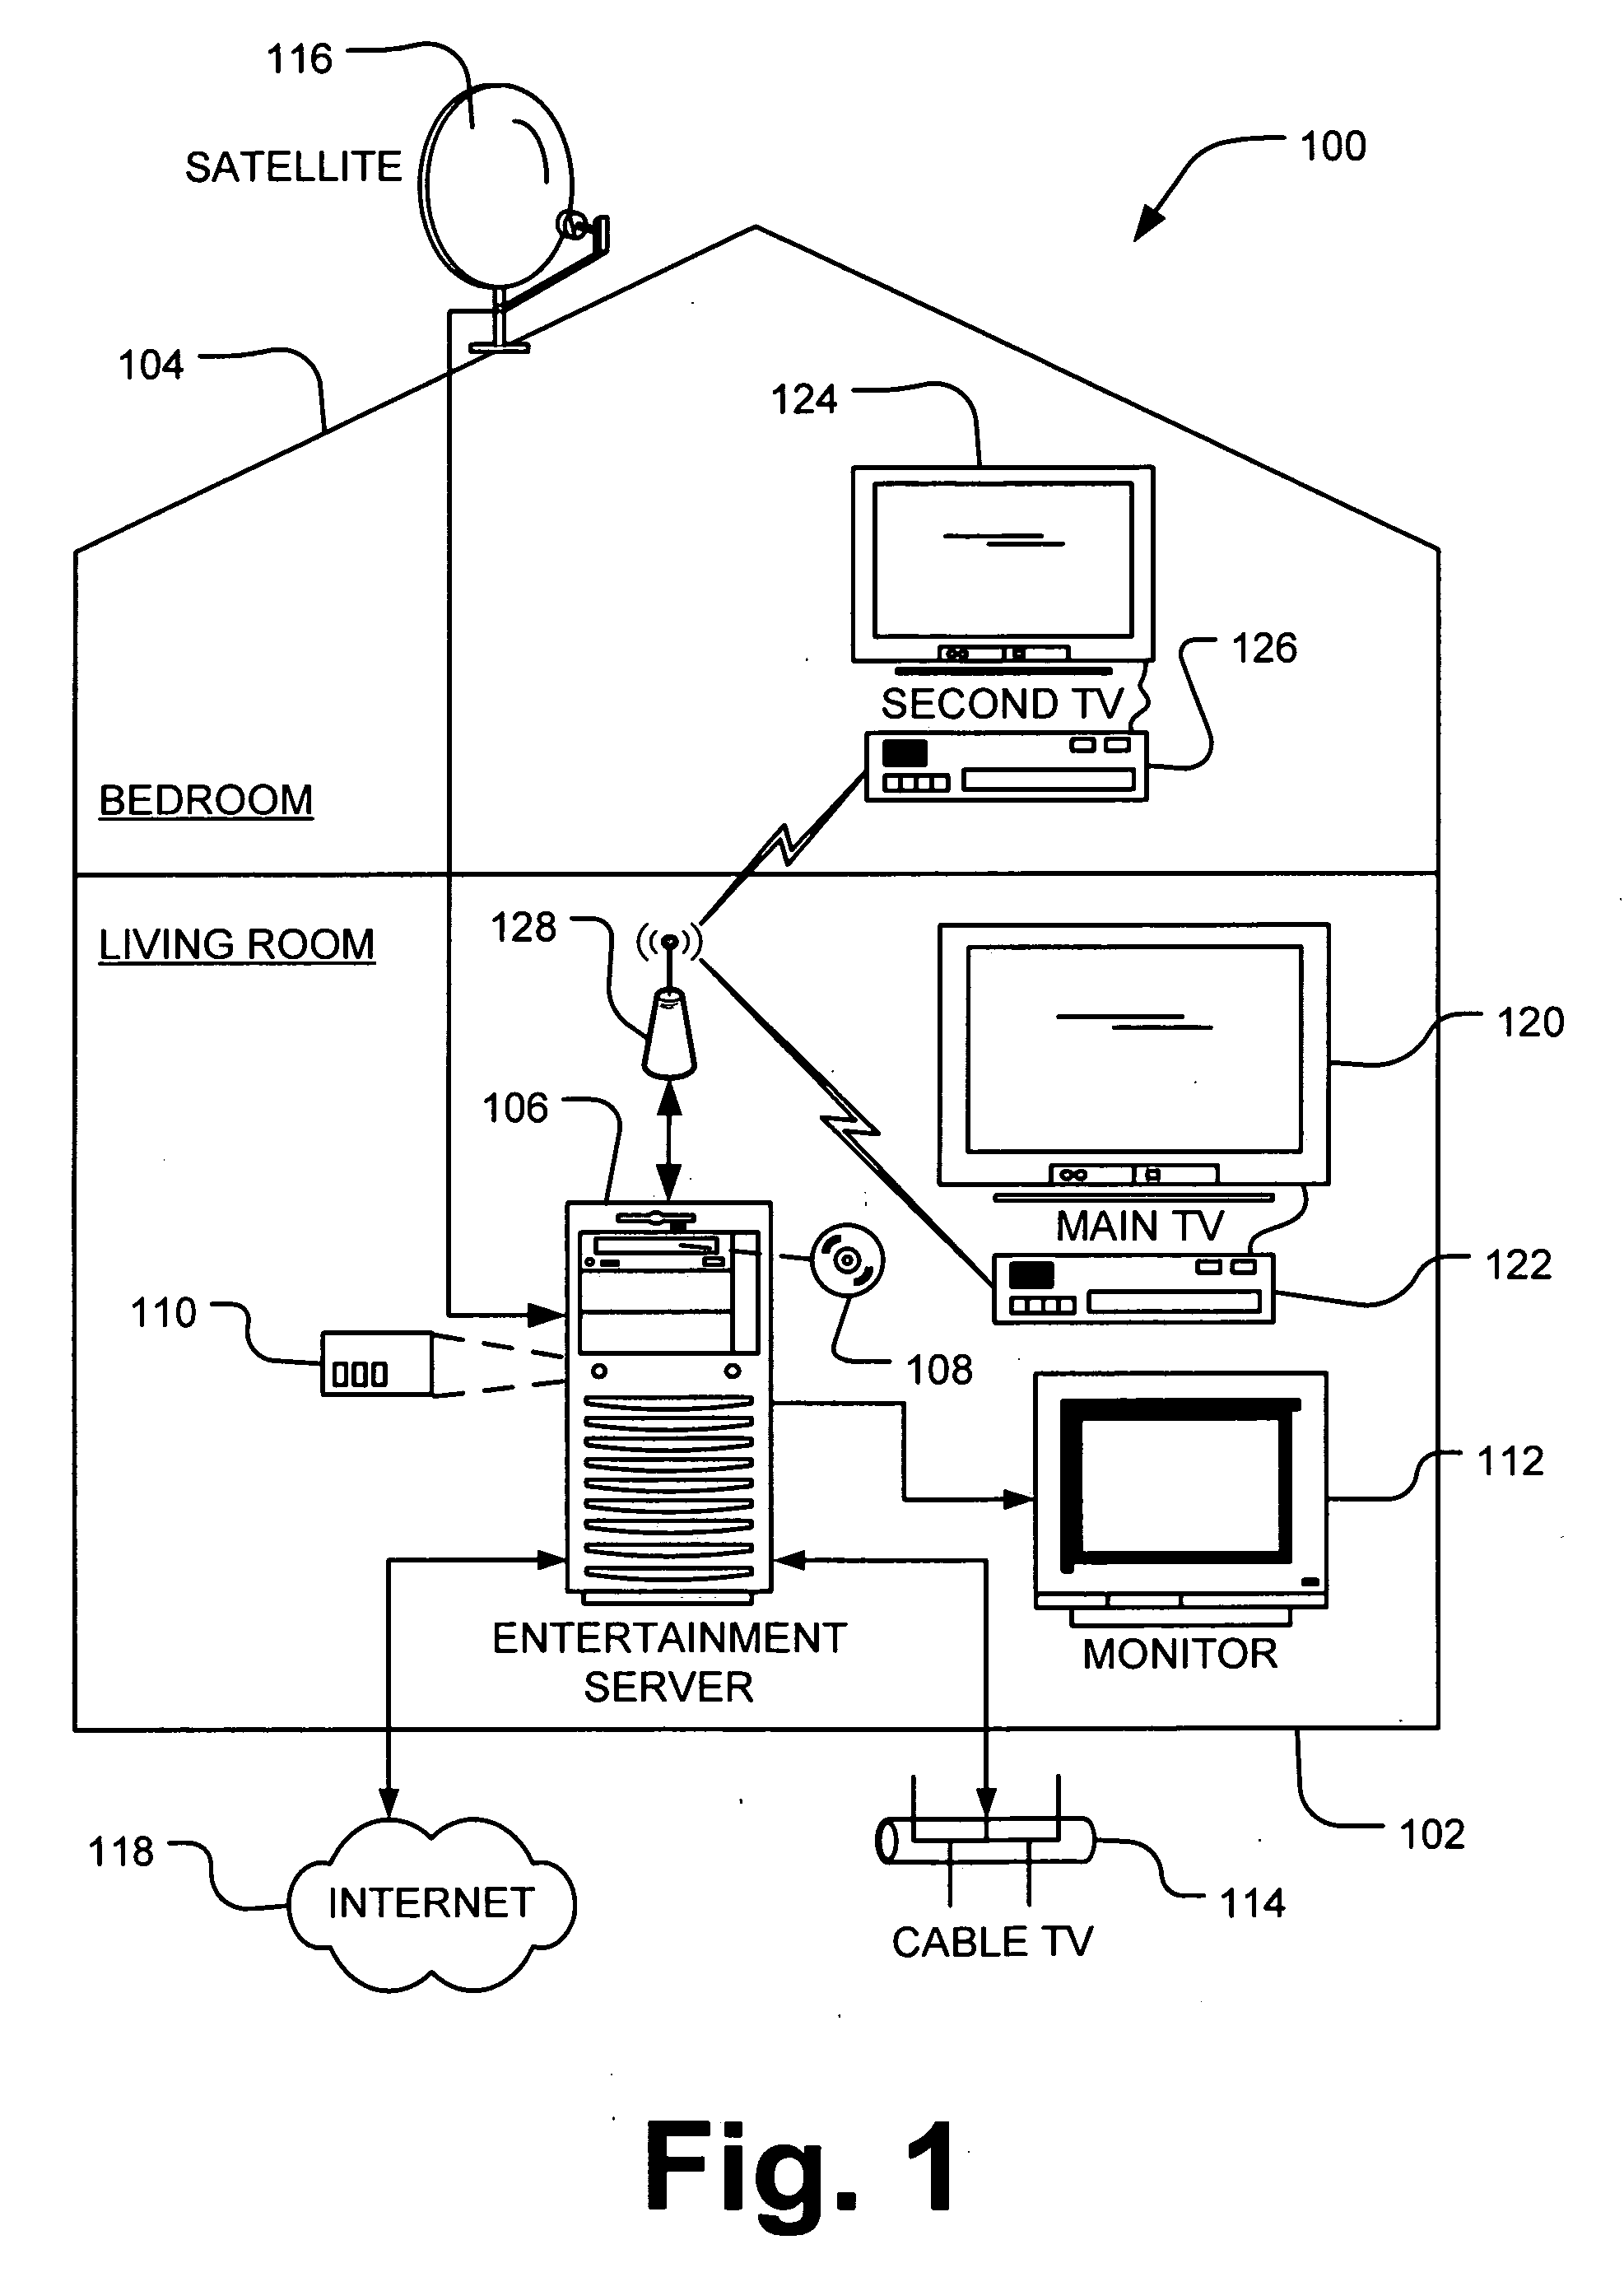 Control and playback of media over network link